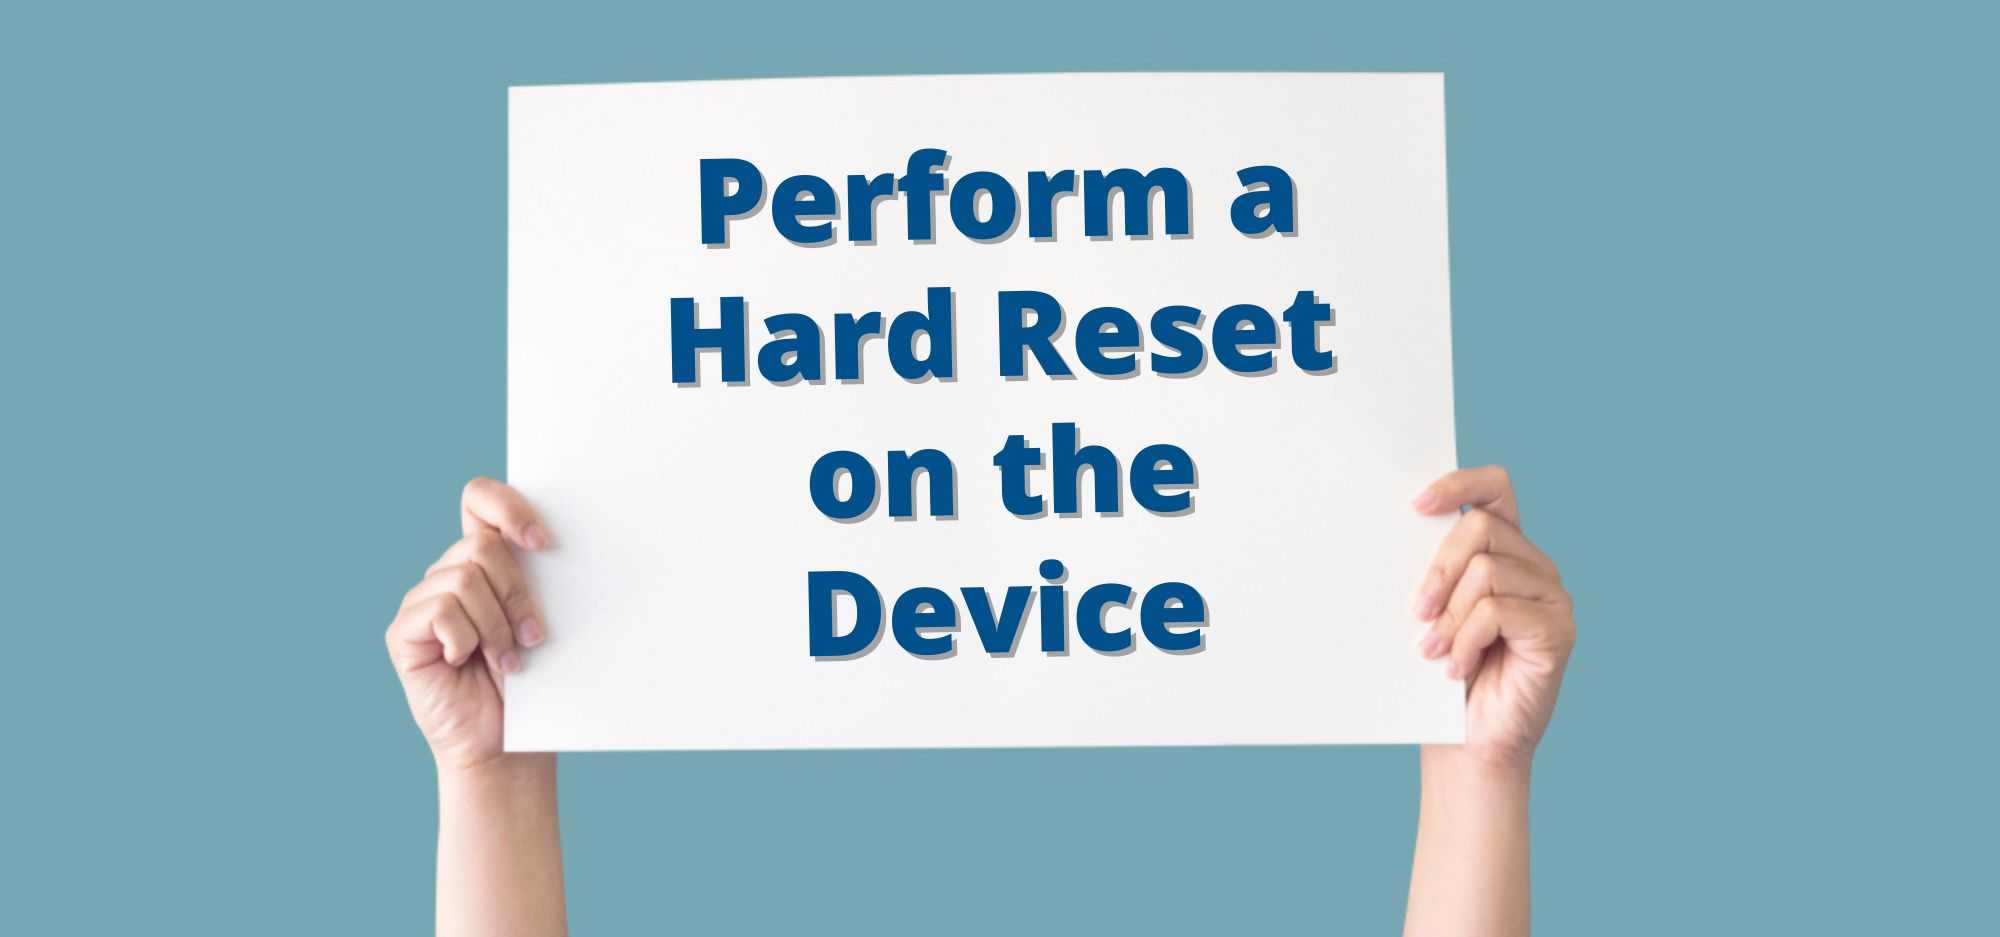 Perform a Hard Reset on the Device